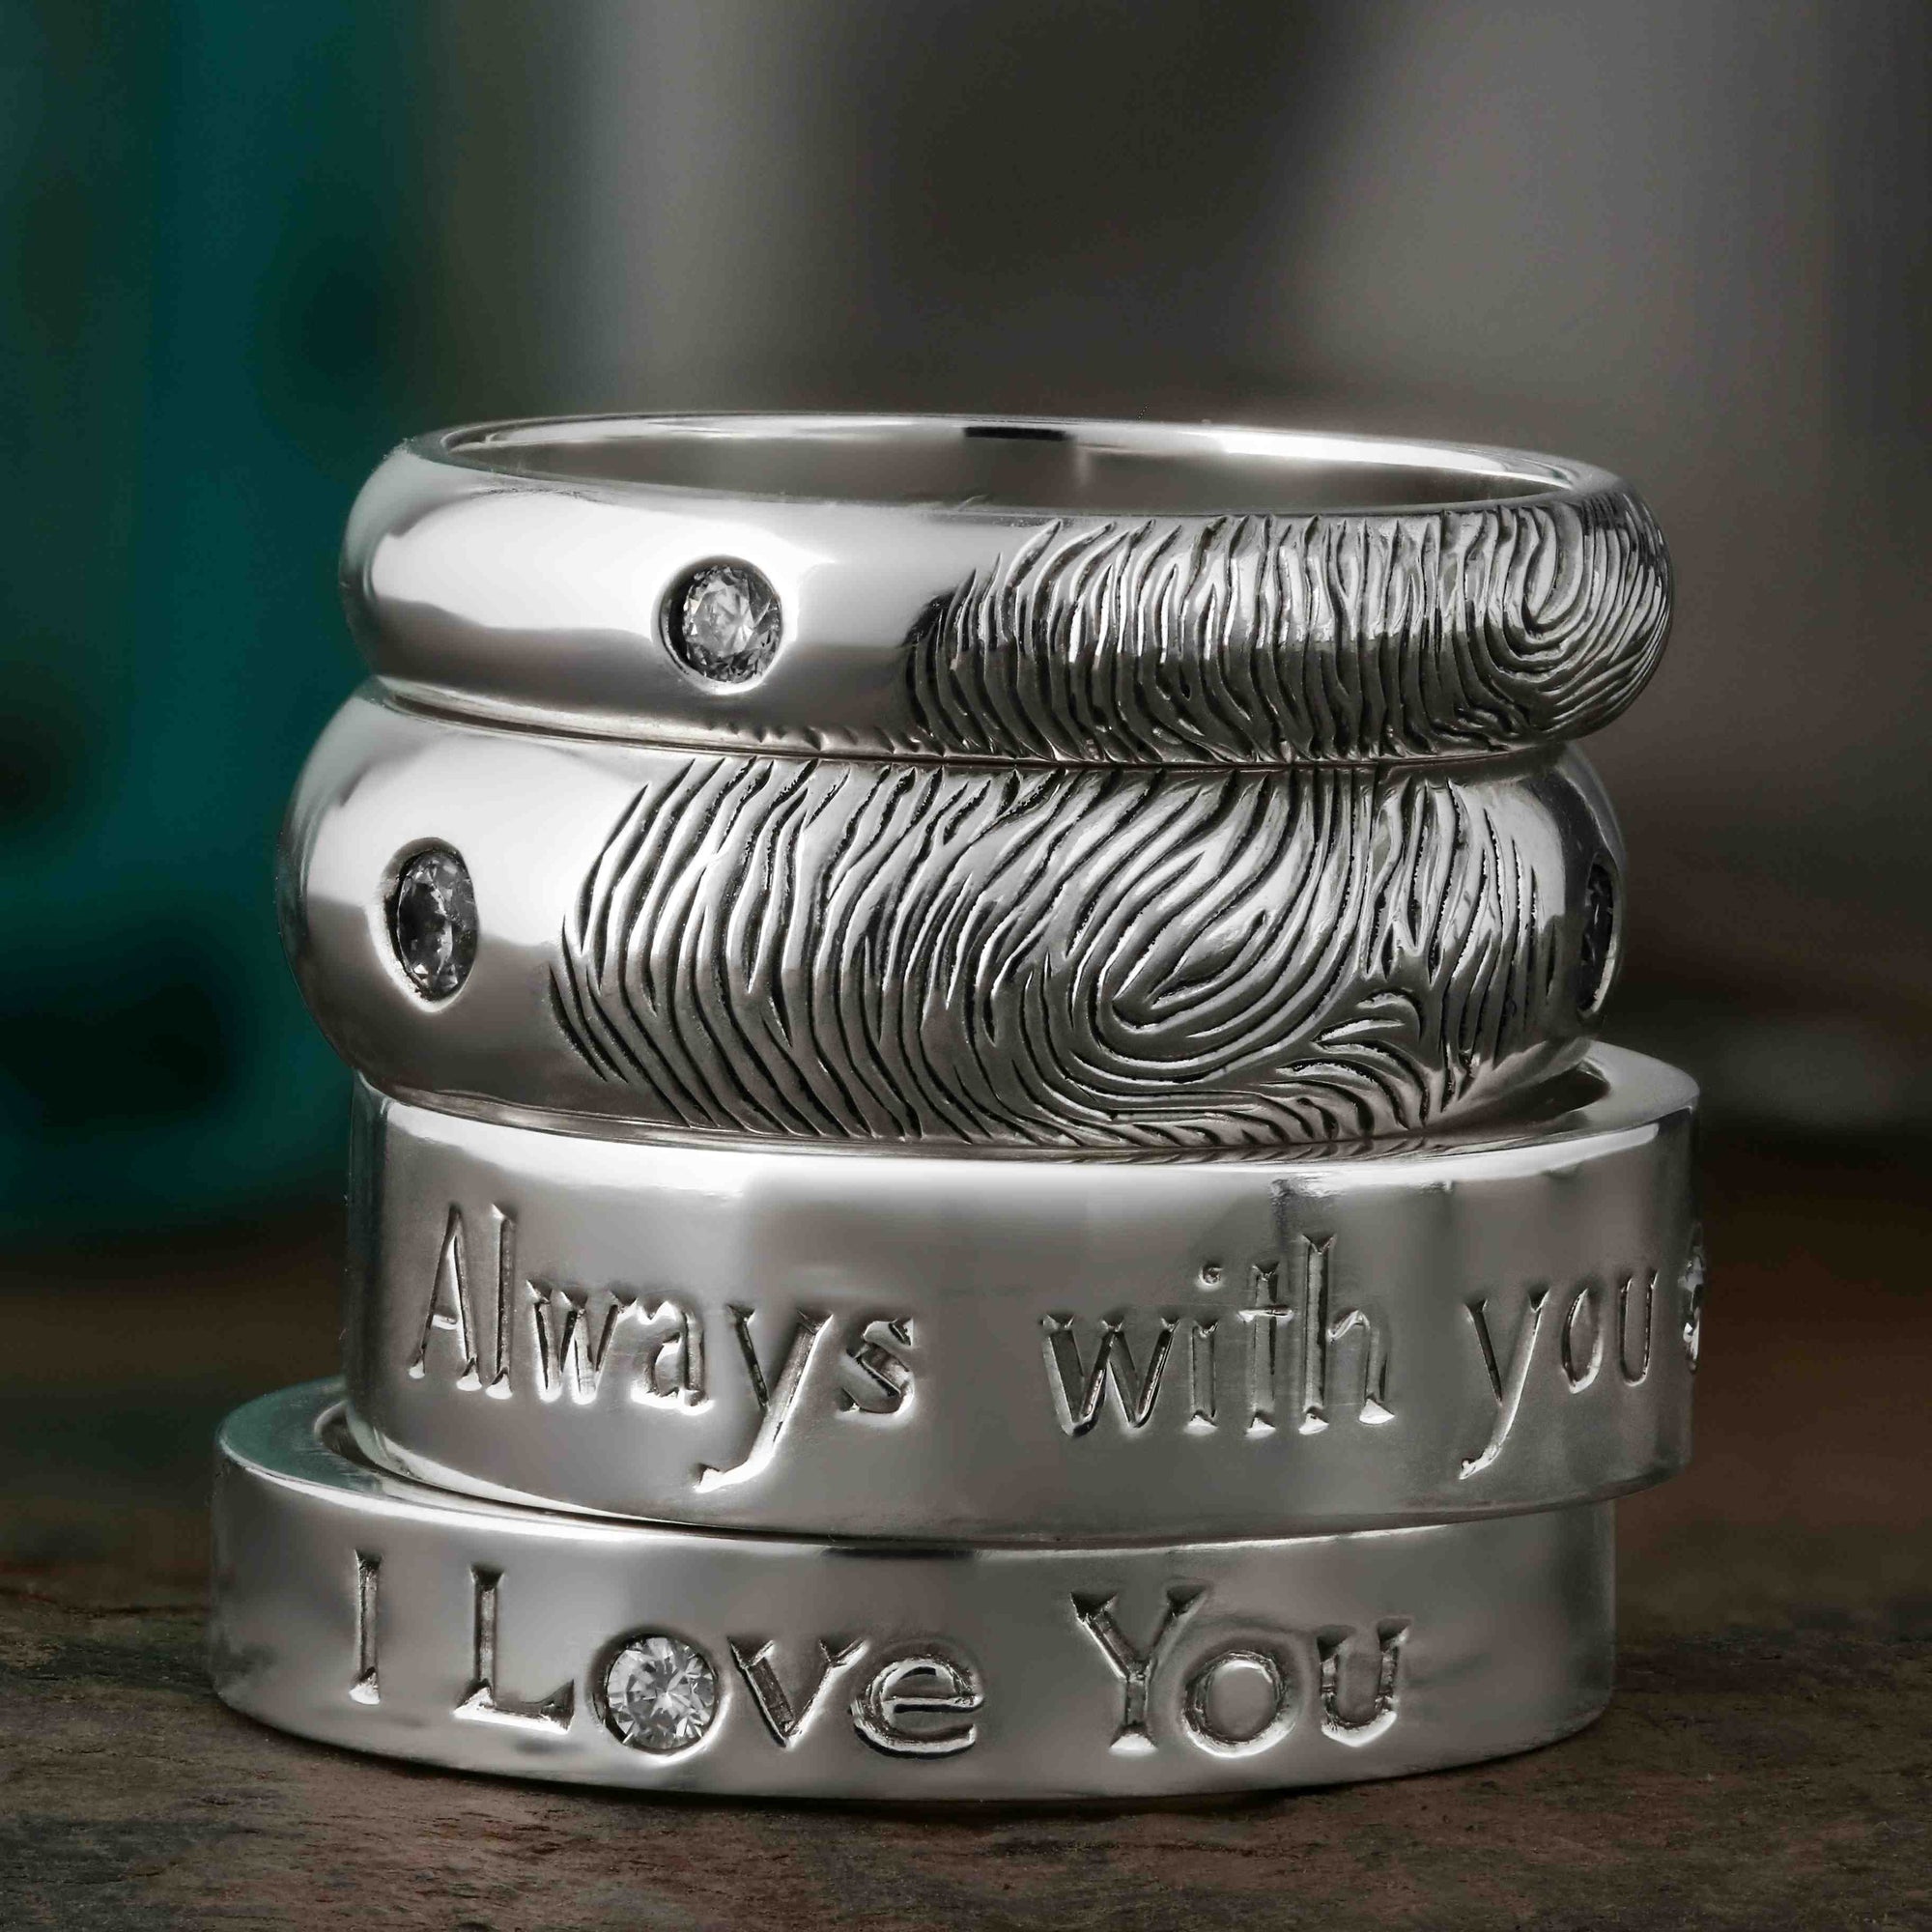 A stack of four platinum and white gold wedding rings, featuring engraved fingerprints, special words and diamonds.  One ring says "I love you" while another says "Always with you".  They sit on a dark wood background with teal silk behind them.